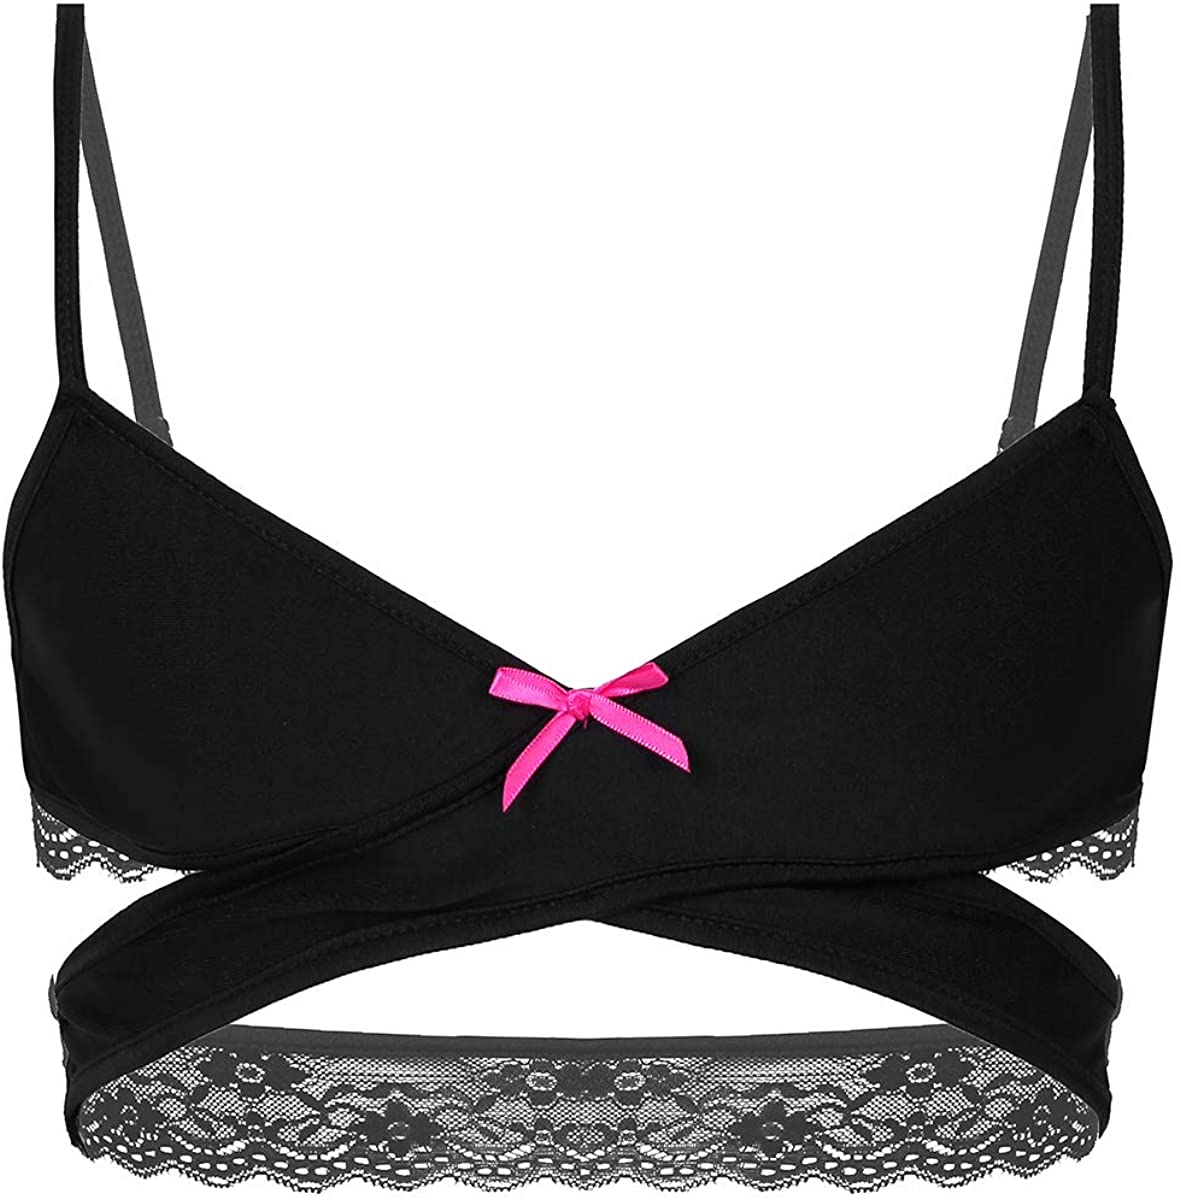 Price:$13.49 YONGHS Men's Sissy Lingerie Cross Over Back Wire-Free Unlined Bra Tops Triangle Bralette Underwear at Amazon Women’s Clothing store